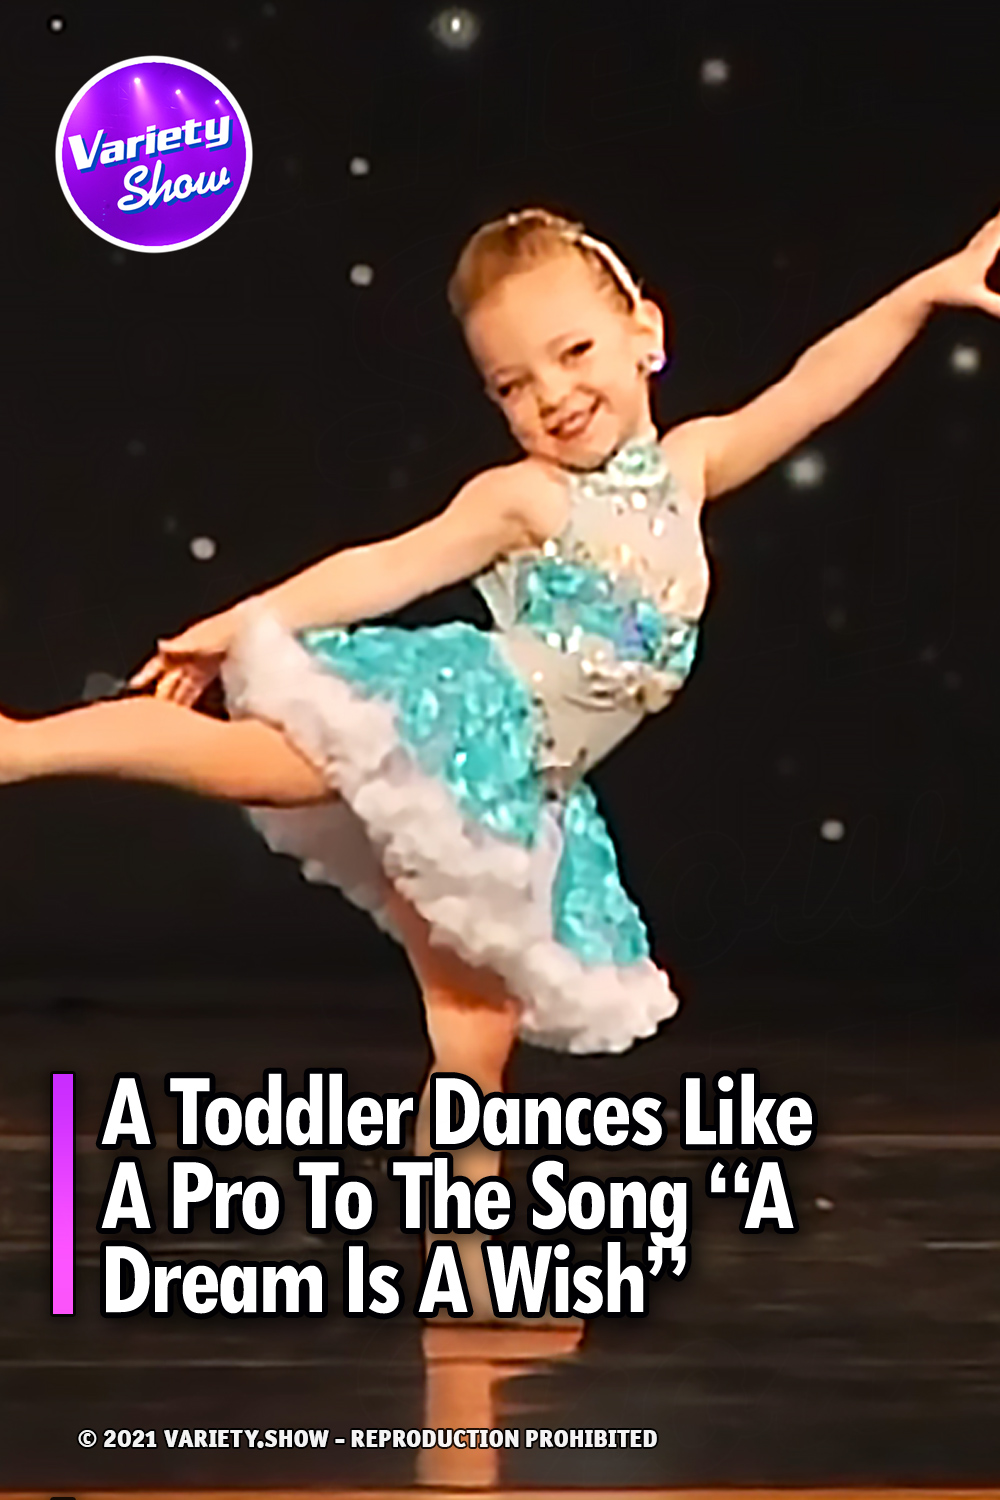 A Toddler Dances Like A Pro To The Song “A Dream Is A Wish”